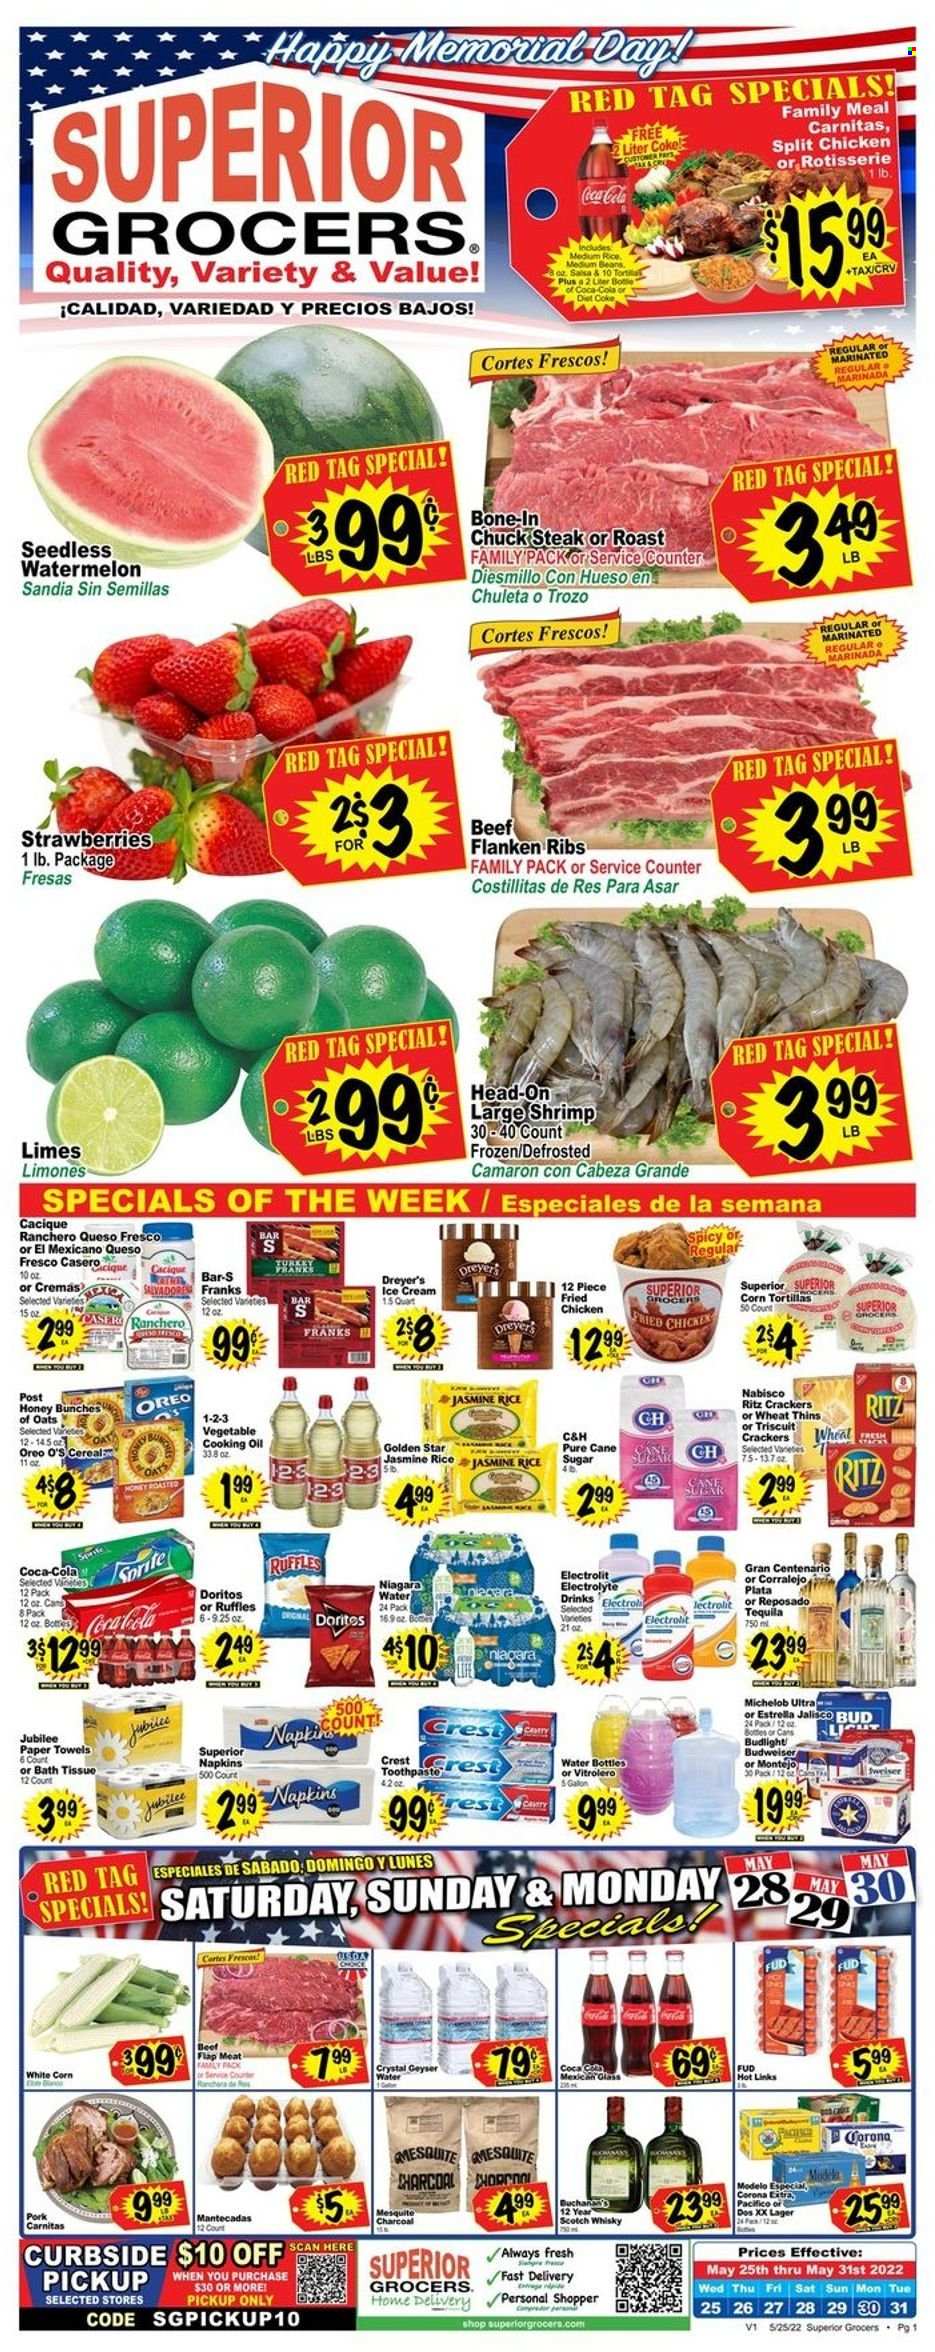 thumbnail - Superior Grocers Flyer - 05/25/2022 - 05/31/2022 - Sales products - corn tortillas, tortillas, beans, limes, strawberries, watermelon, beef meat, steak, chuck steak, shrimps, fried chicken, queso fresco, Oreo, ice cream, crackers, RITZ, Doritos, Thins, Ruffles, sugar, cereals, jasmine rice, salsa, oil, cooking oil, Coca-Cola, Sprite, Diet Coke, tequila, scotch whisky, whisky, beer, Corona Extra, Lager, Modelo, toothpaste, Crest, drink bottle, Budweiser, Michelob. Page 1.